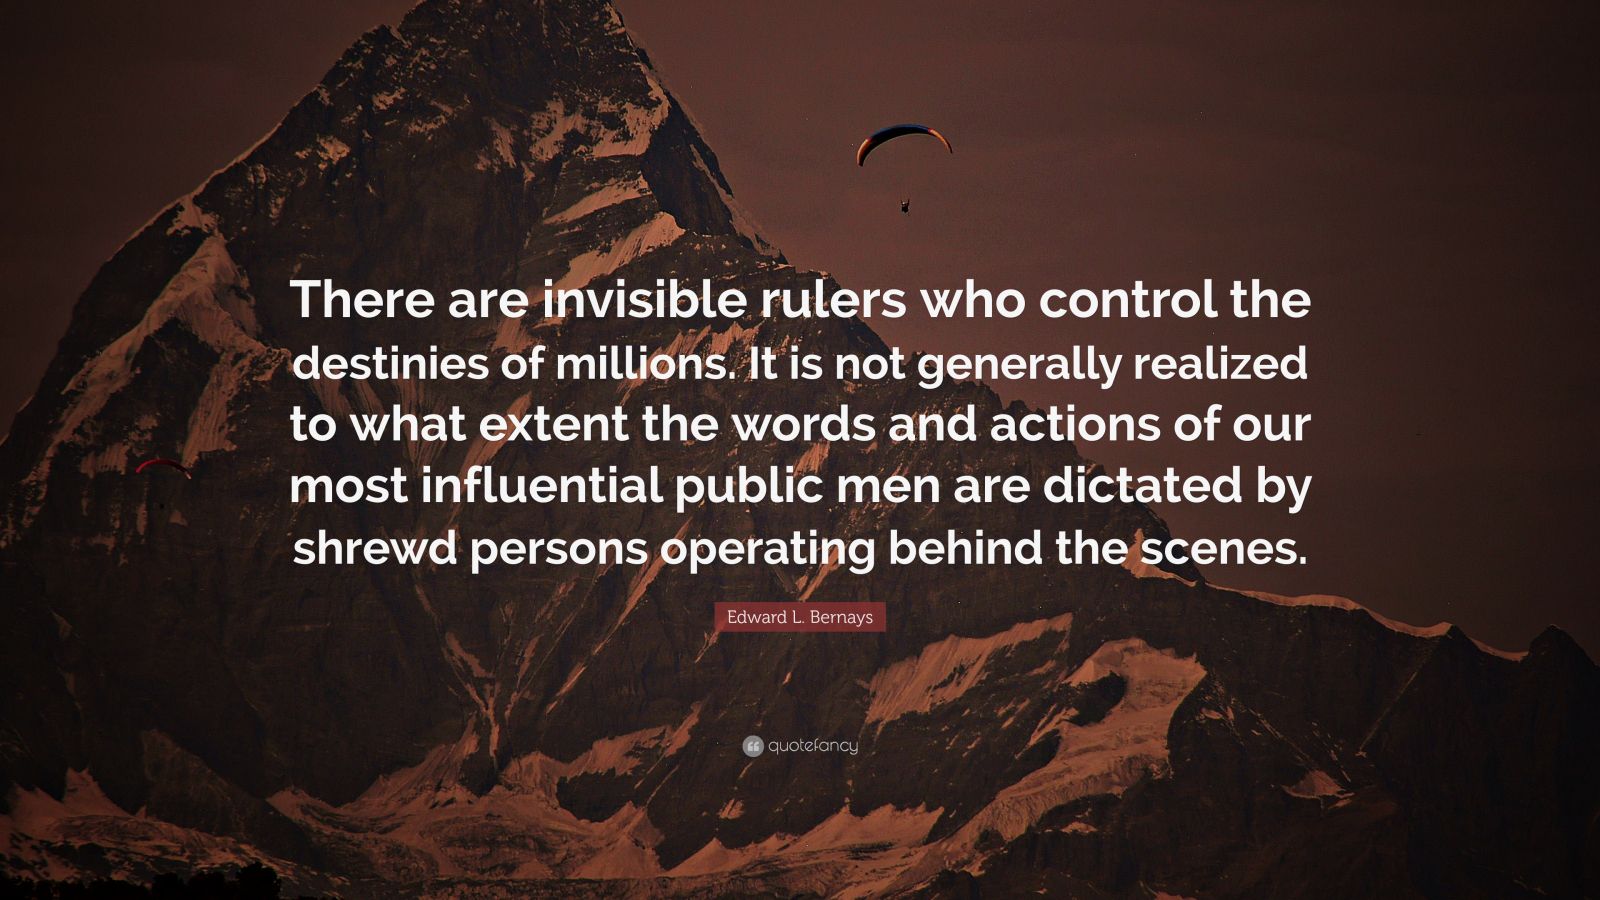 Edward L. Bernays Quote: “There are invisible rulers who control